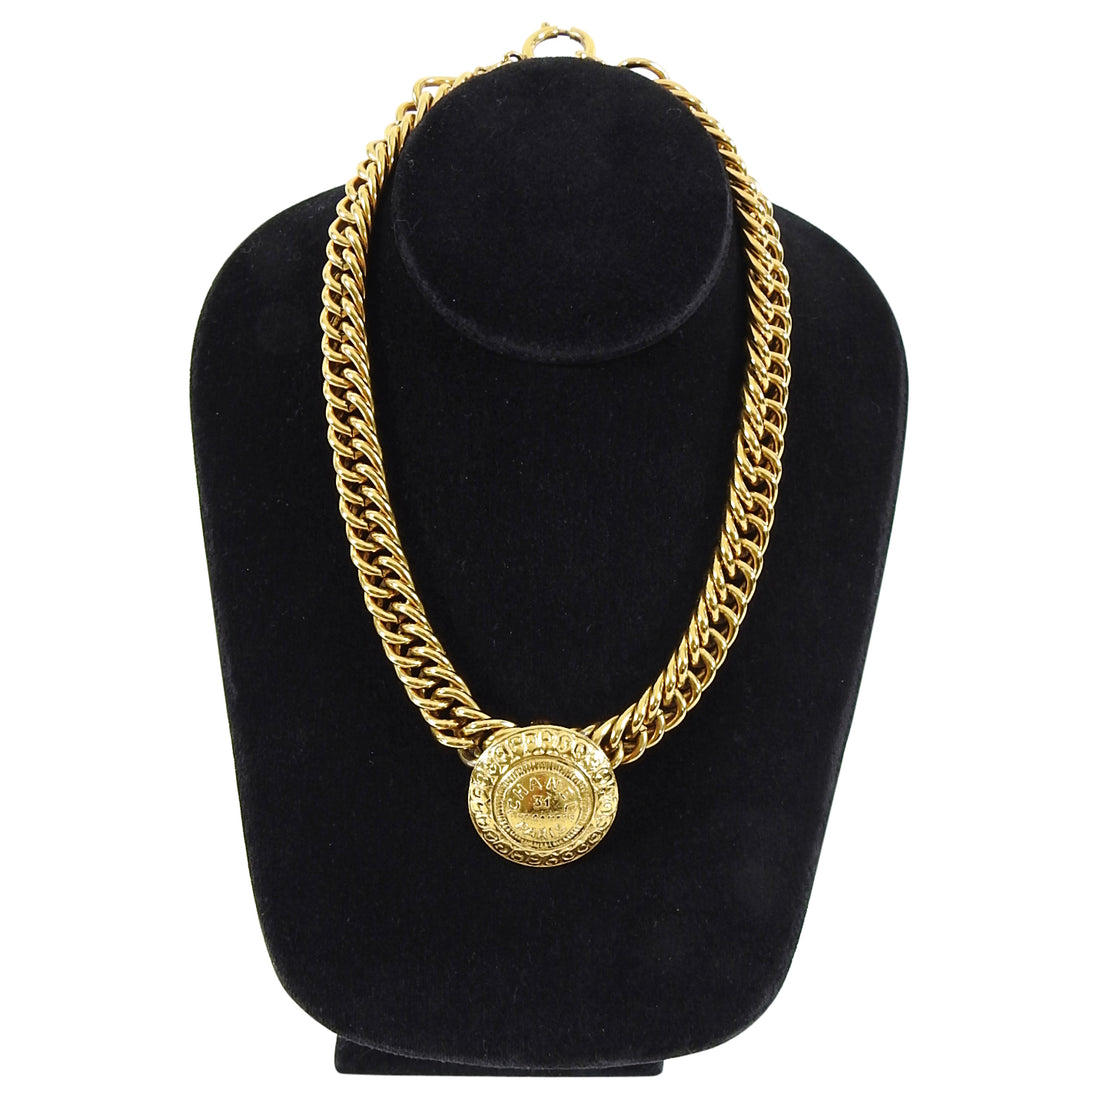 Chanel Vintage 1990's 31 Rue Cambon Medallion Chain Necklace